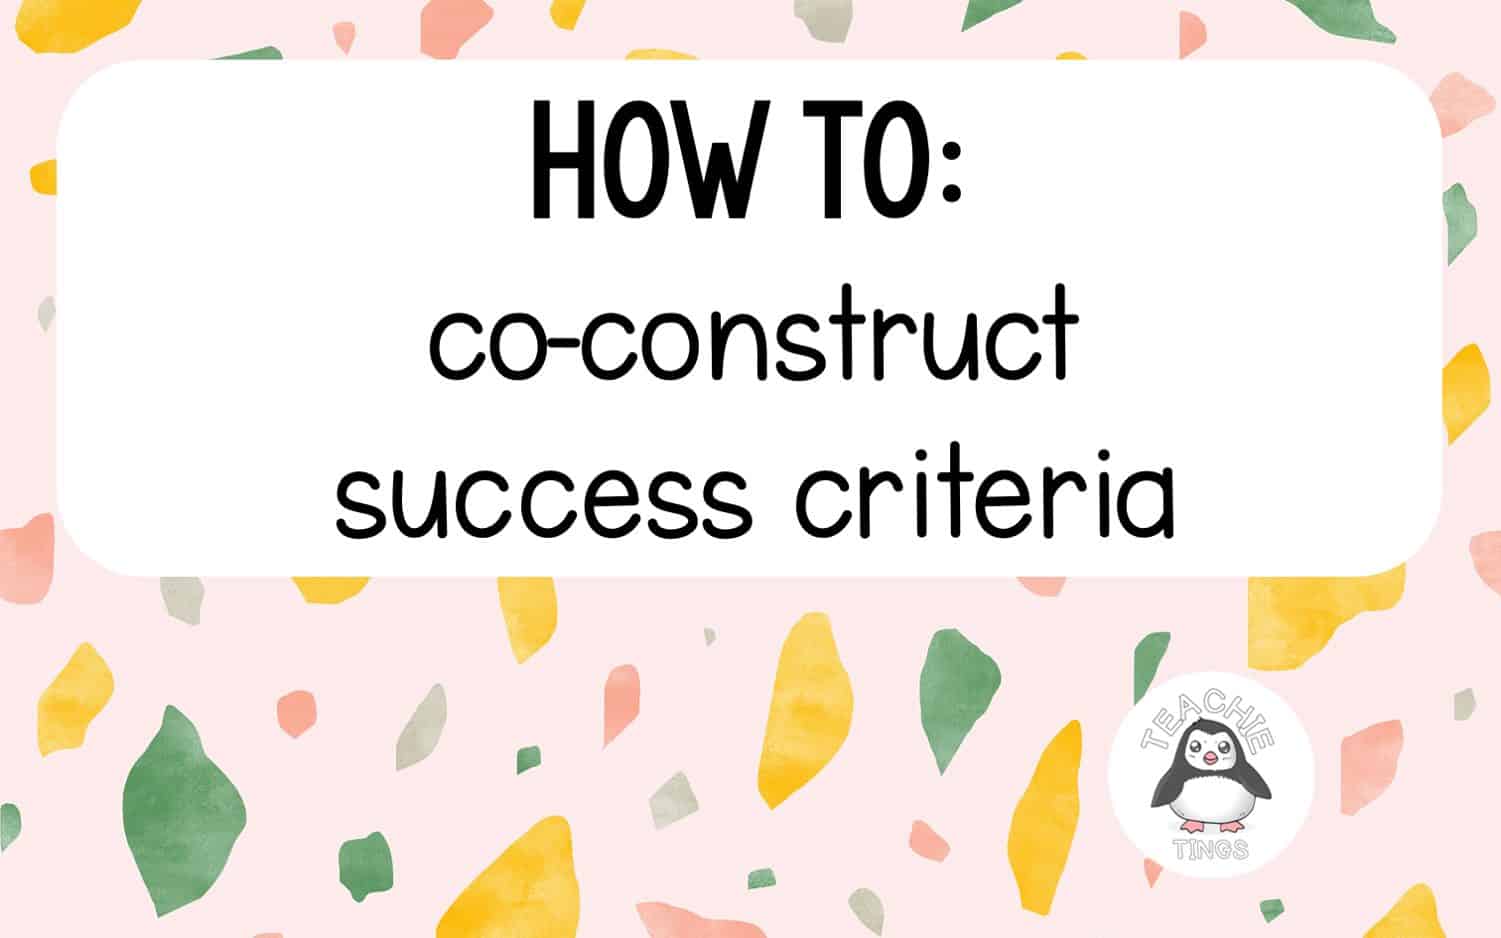 how to co-construct success criteria